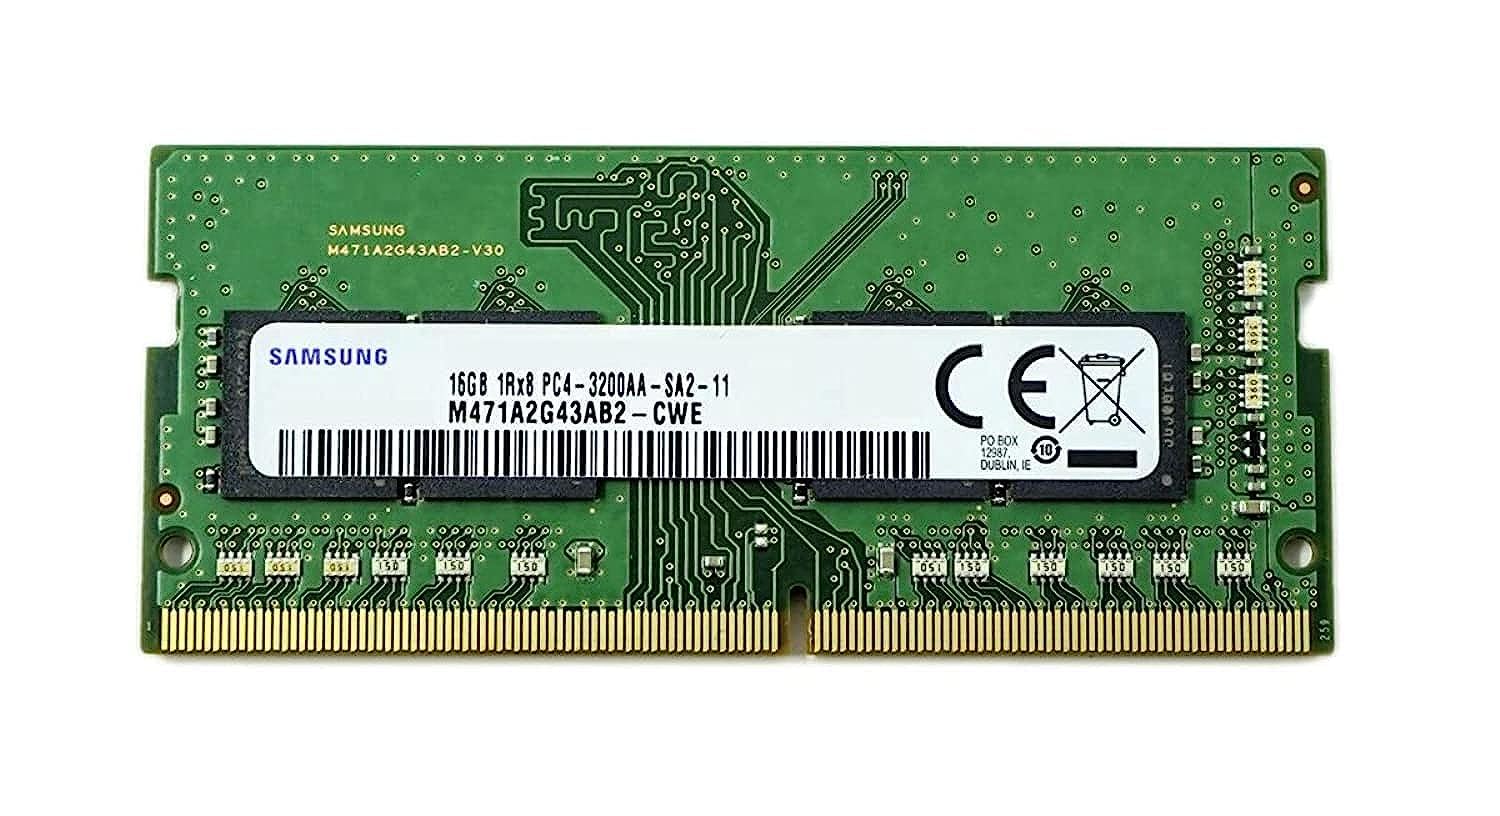 Samsung SODIMM 16GB PC4 3200 DDR4 1Rx8 M471A2G43AB2-CWE Laptop Notebook RAM Memory for Dell HP Lenovo